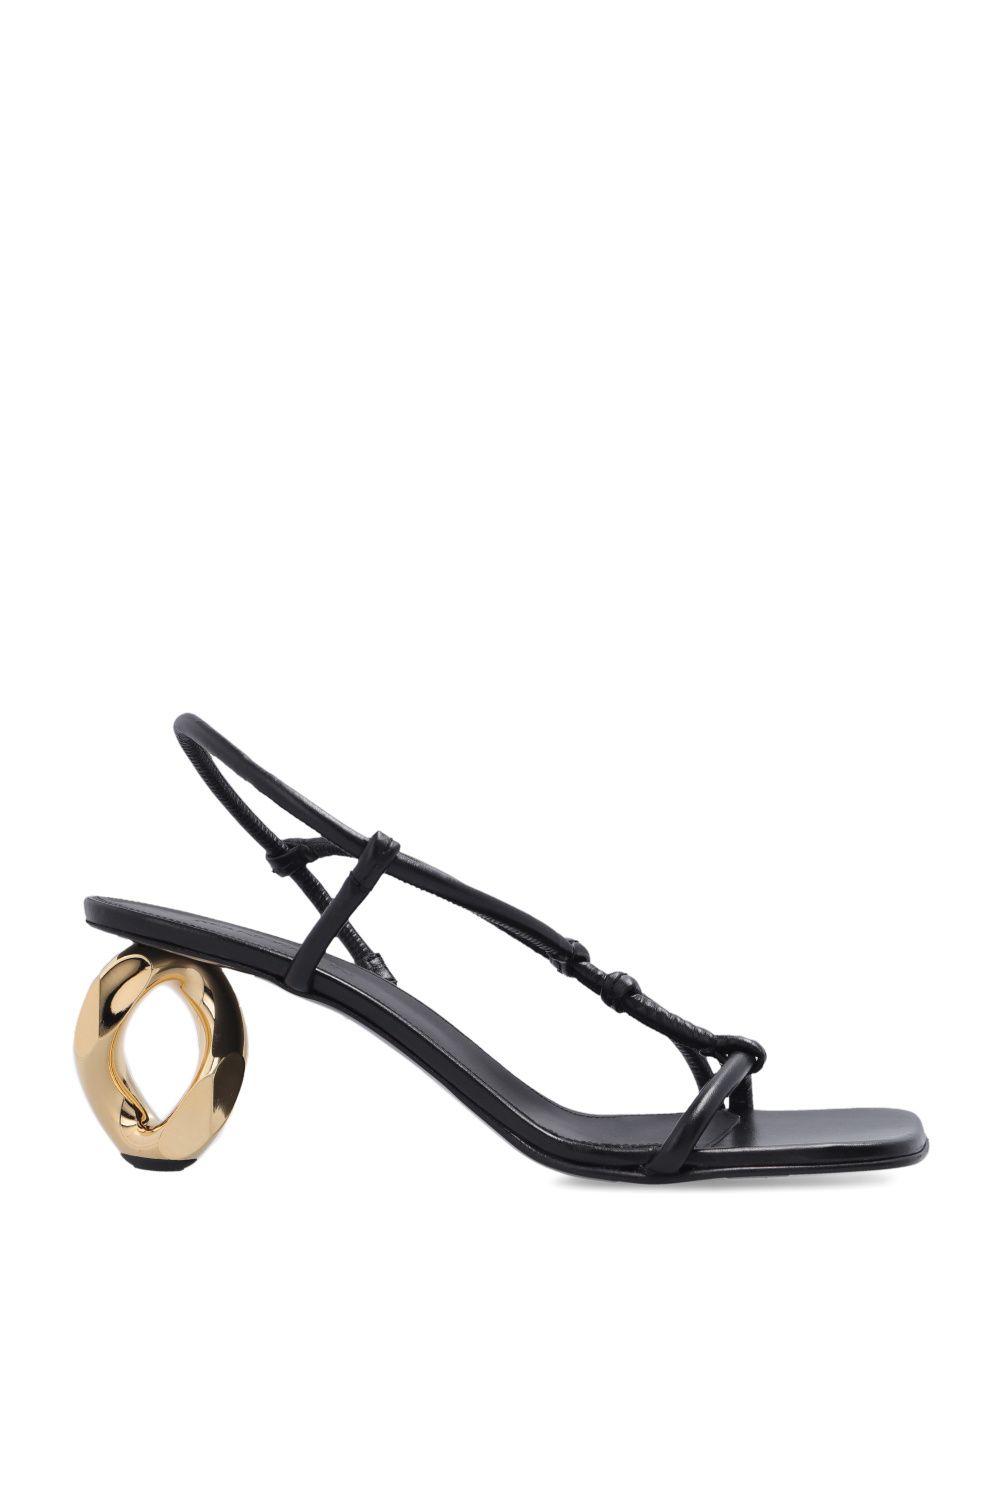 JW Anderson Heeled Leather Sandals in Black | Lyst